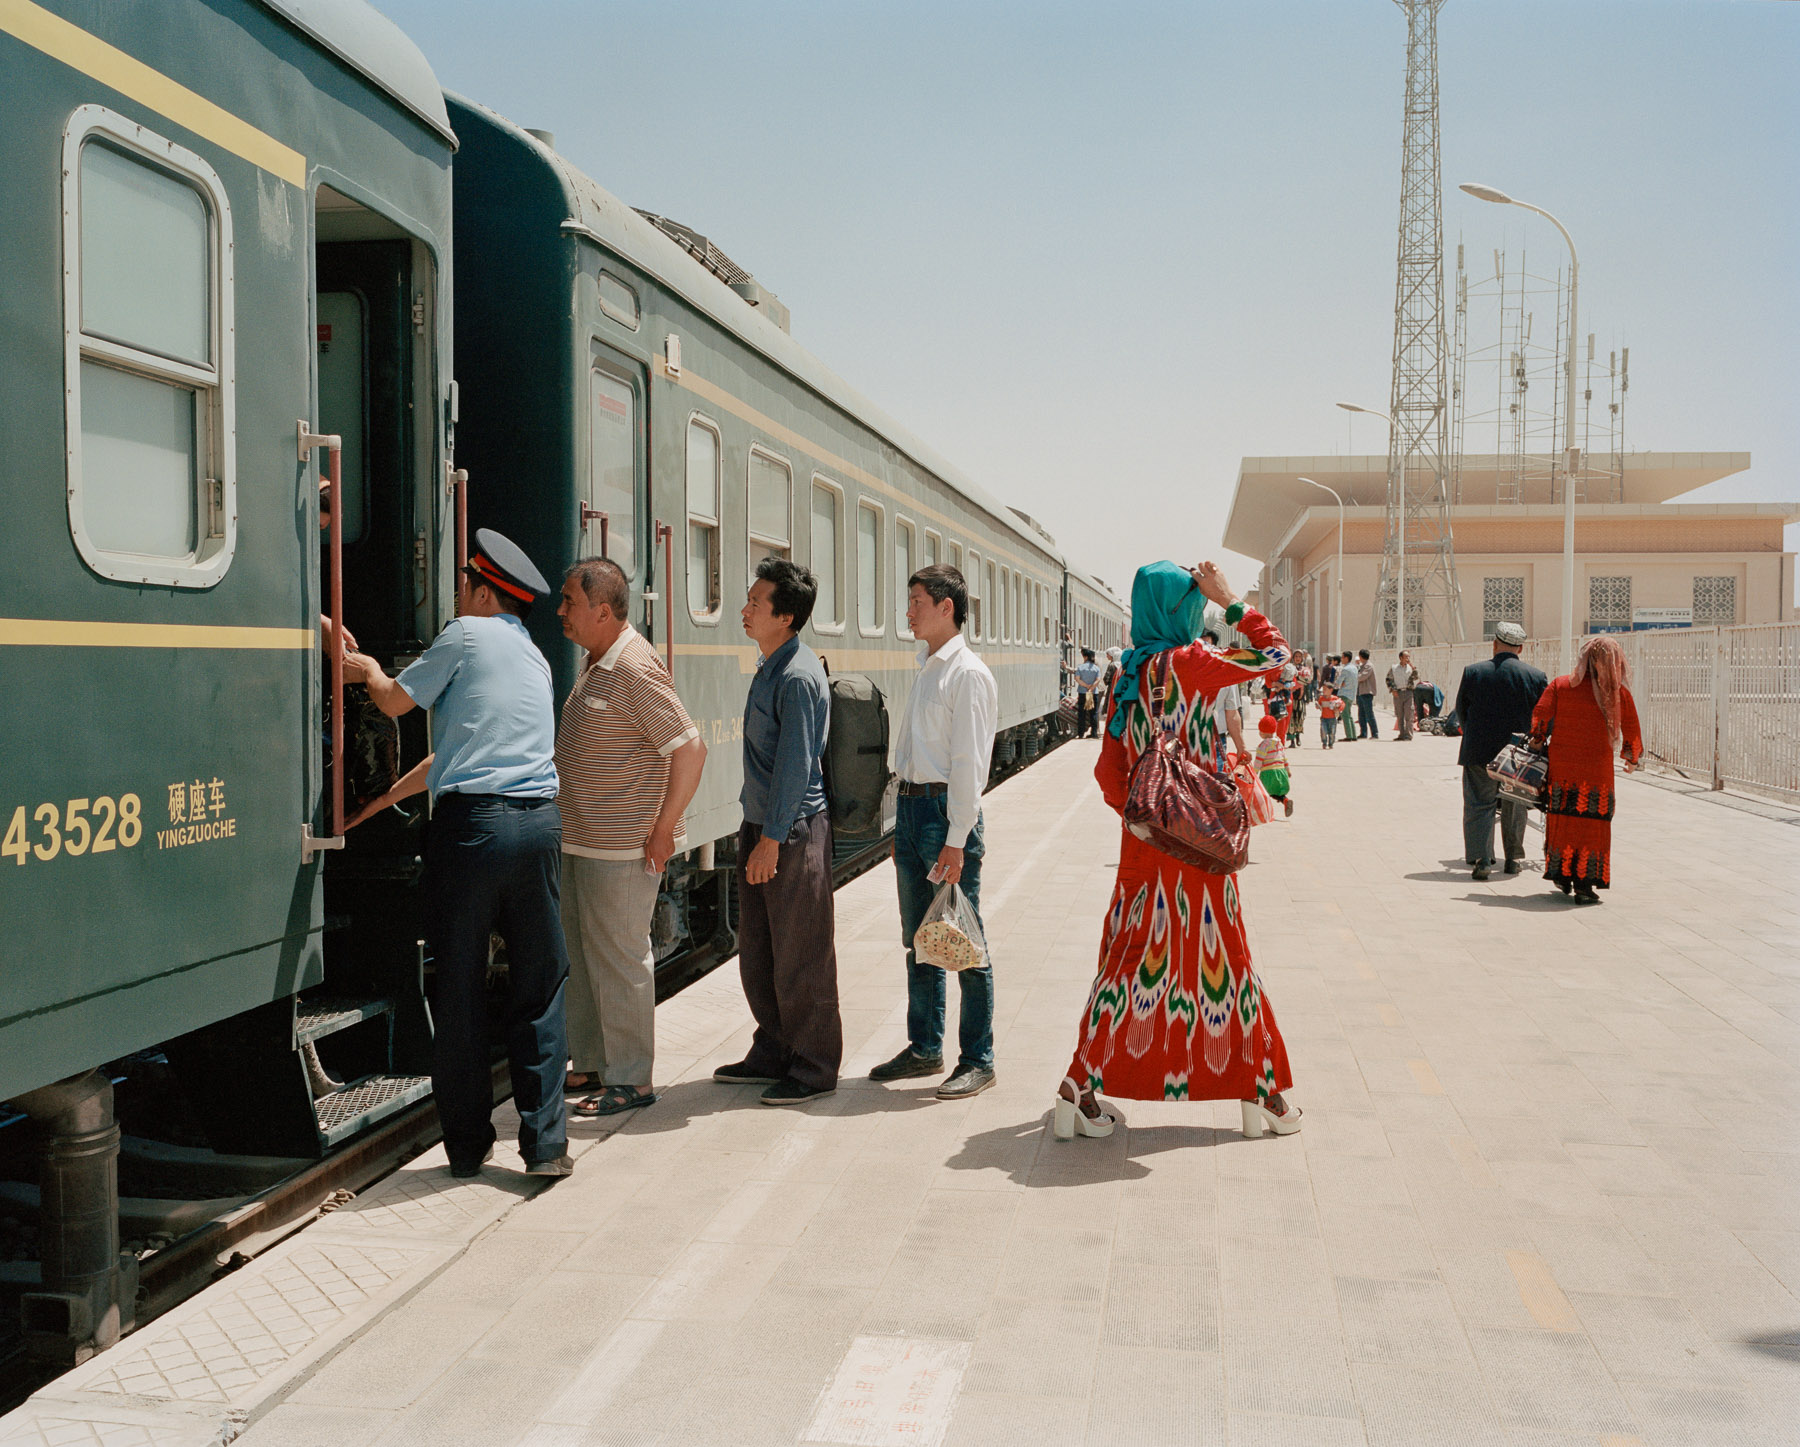  May 2016. Xinjiang province, China. Travellers getting on and off the train to Hotan at the Kashgar railway station. This is the only railway linking the oasis towns south of the Taklamakan desert where most of Xinjiang's Uighur community in Xinjian